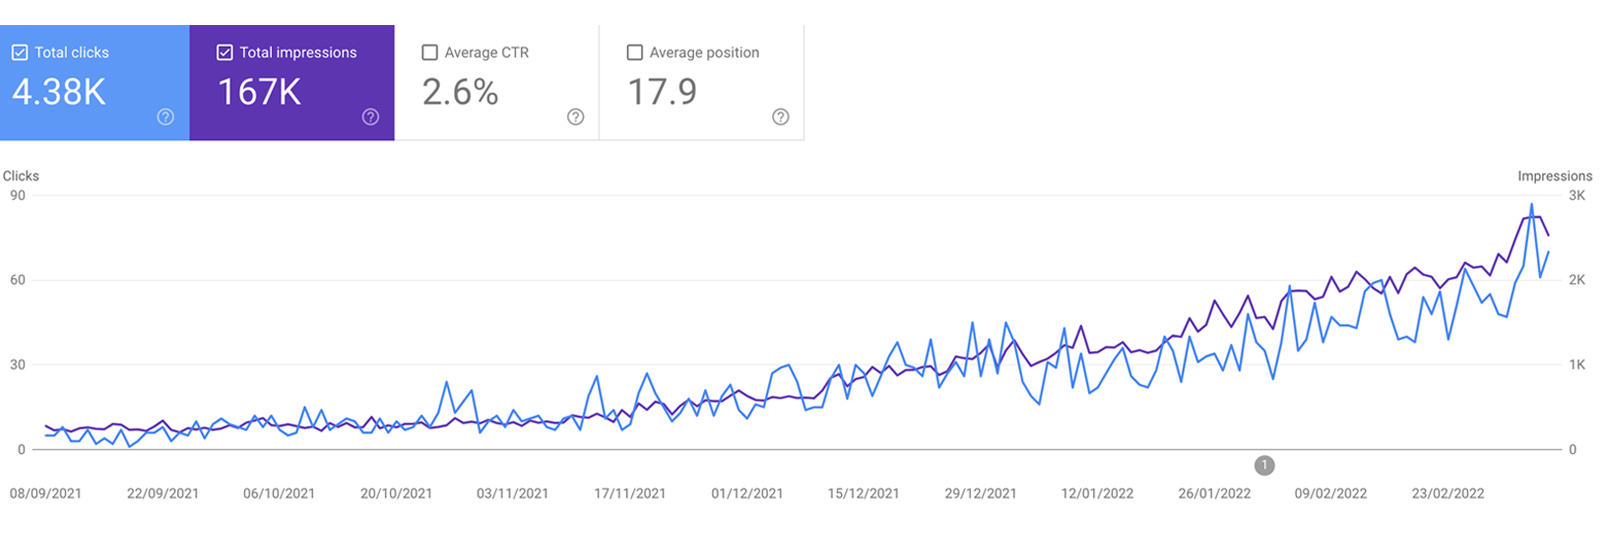 SEO Case Study: Leap in impressions and clicks within 3 months of launching a website